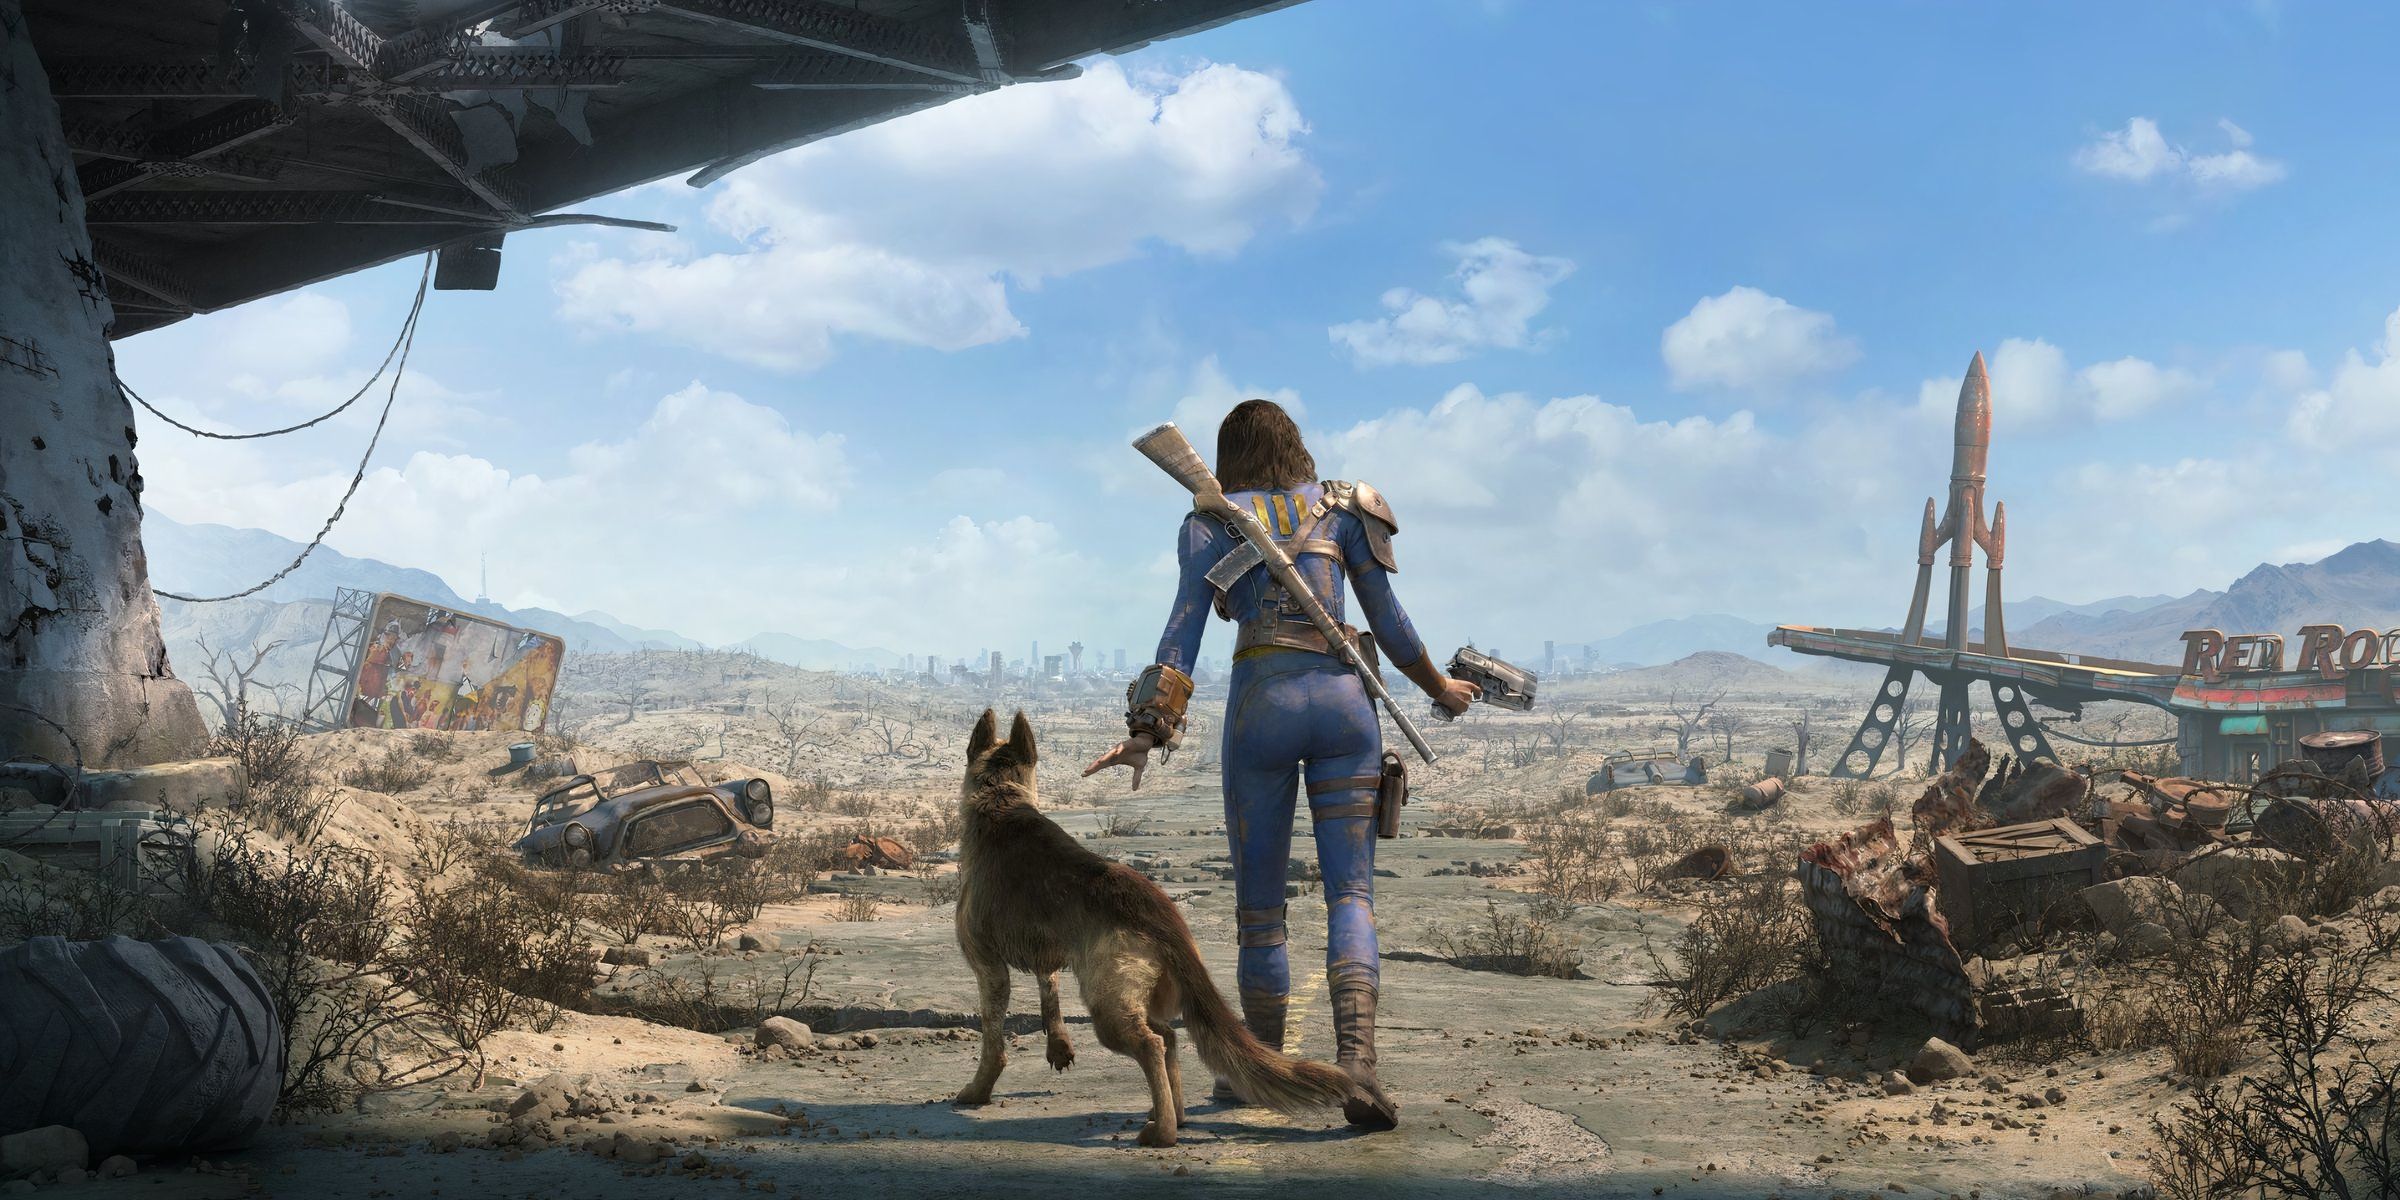 Fallout 5 should fully embrace a trend triggered by the Amazon series